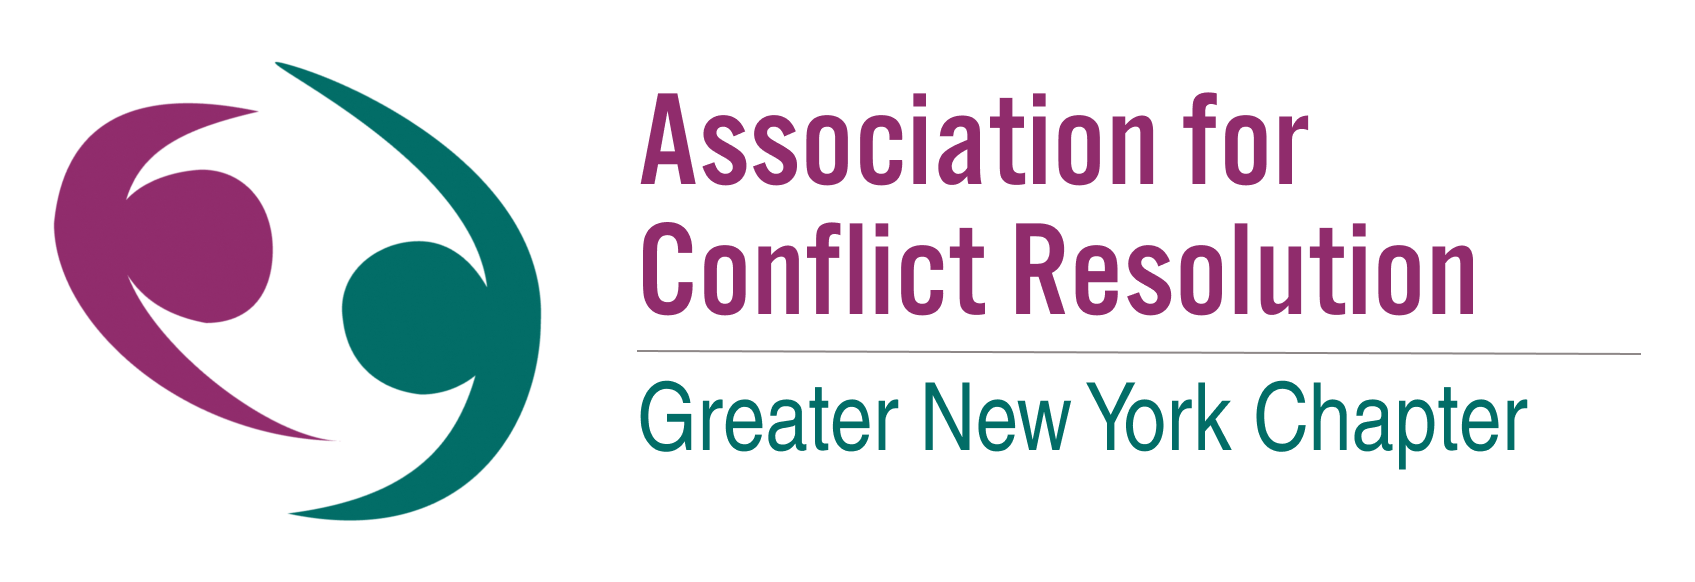 [LOGO] Association for Conflict Resolution - Greater New York Chapter